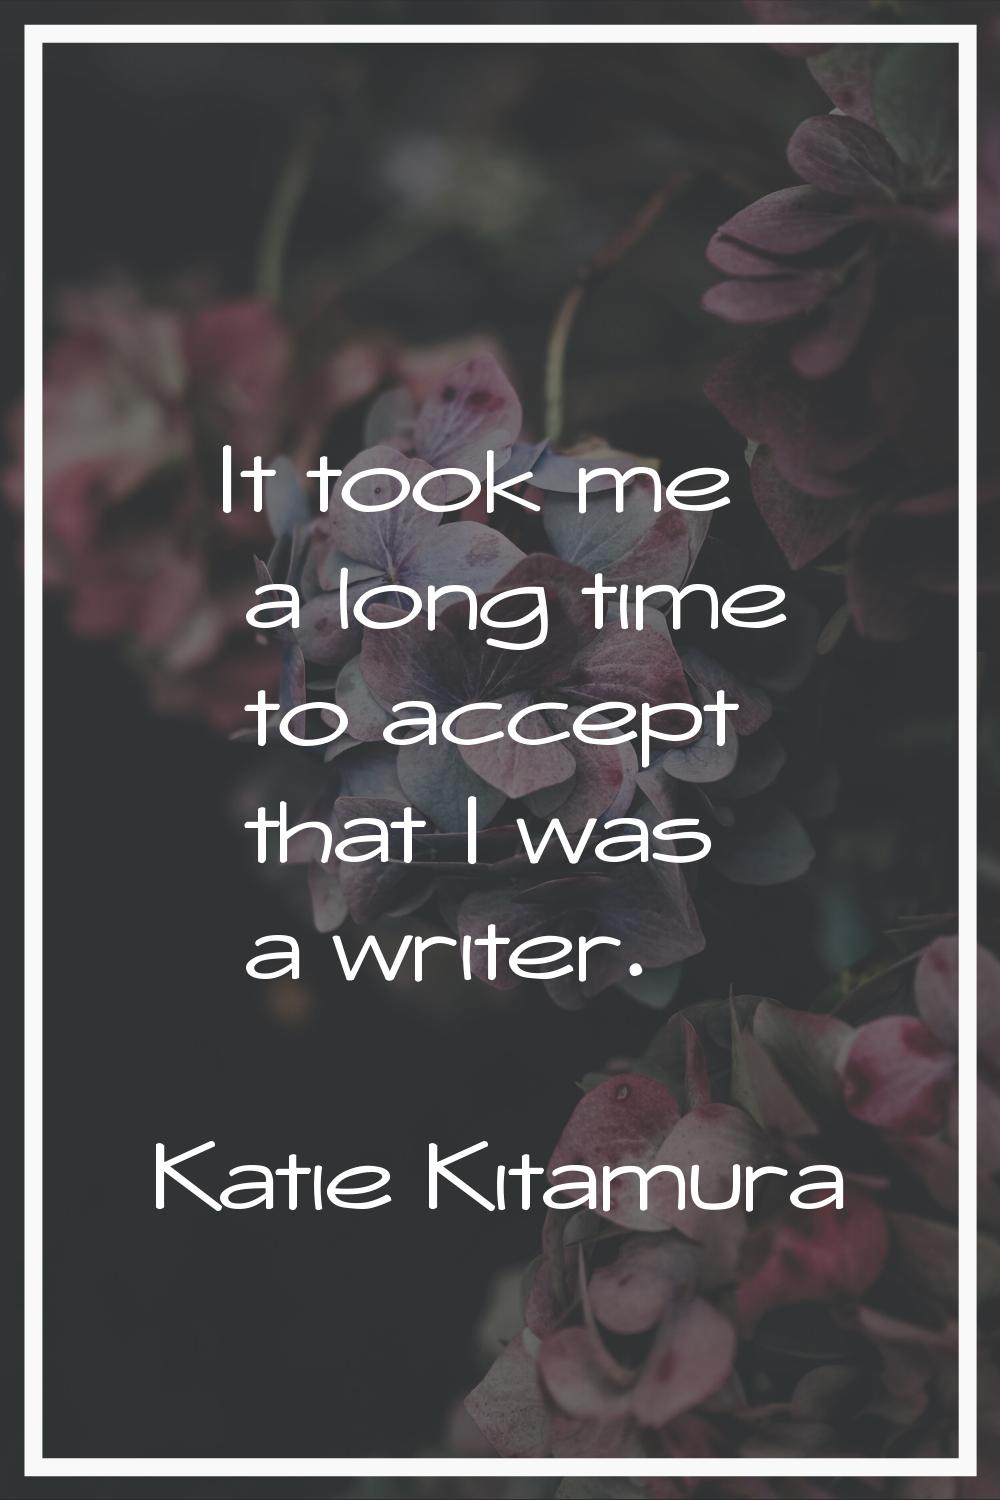 It took me a long time to accept that I was a writer.